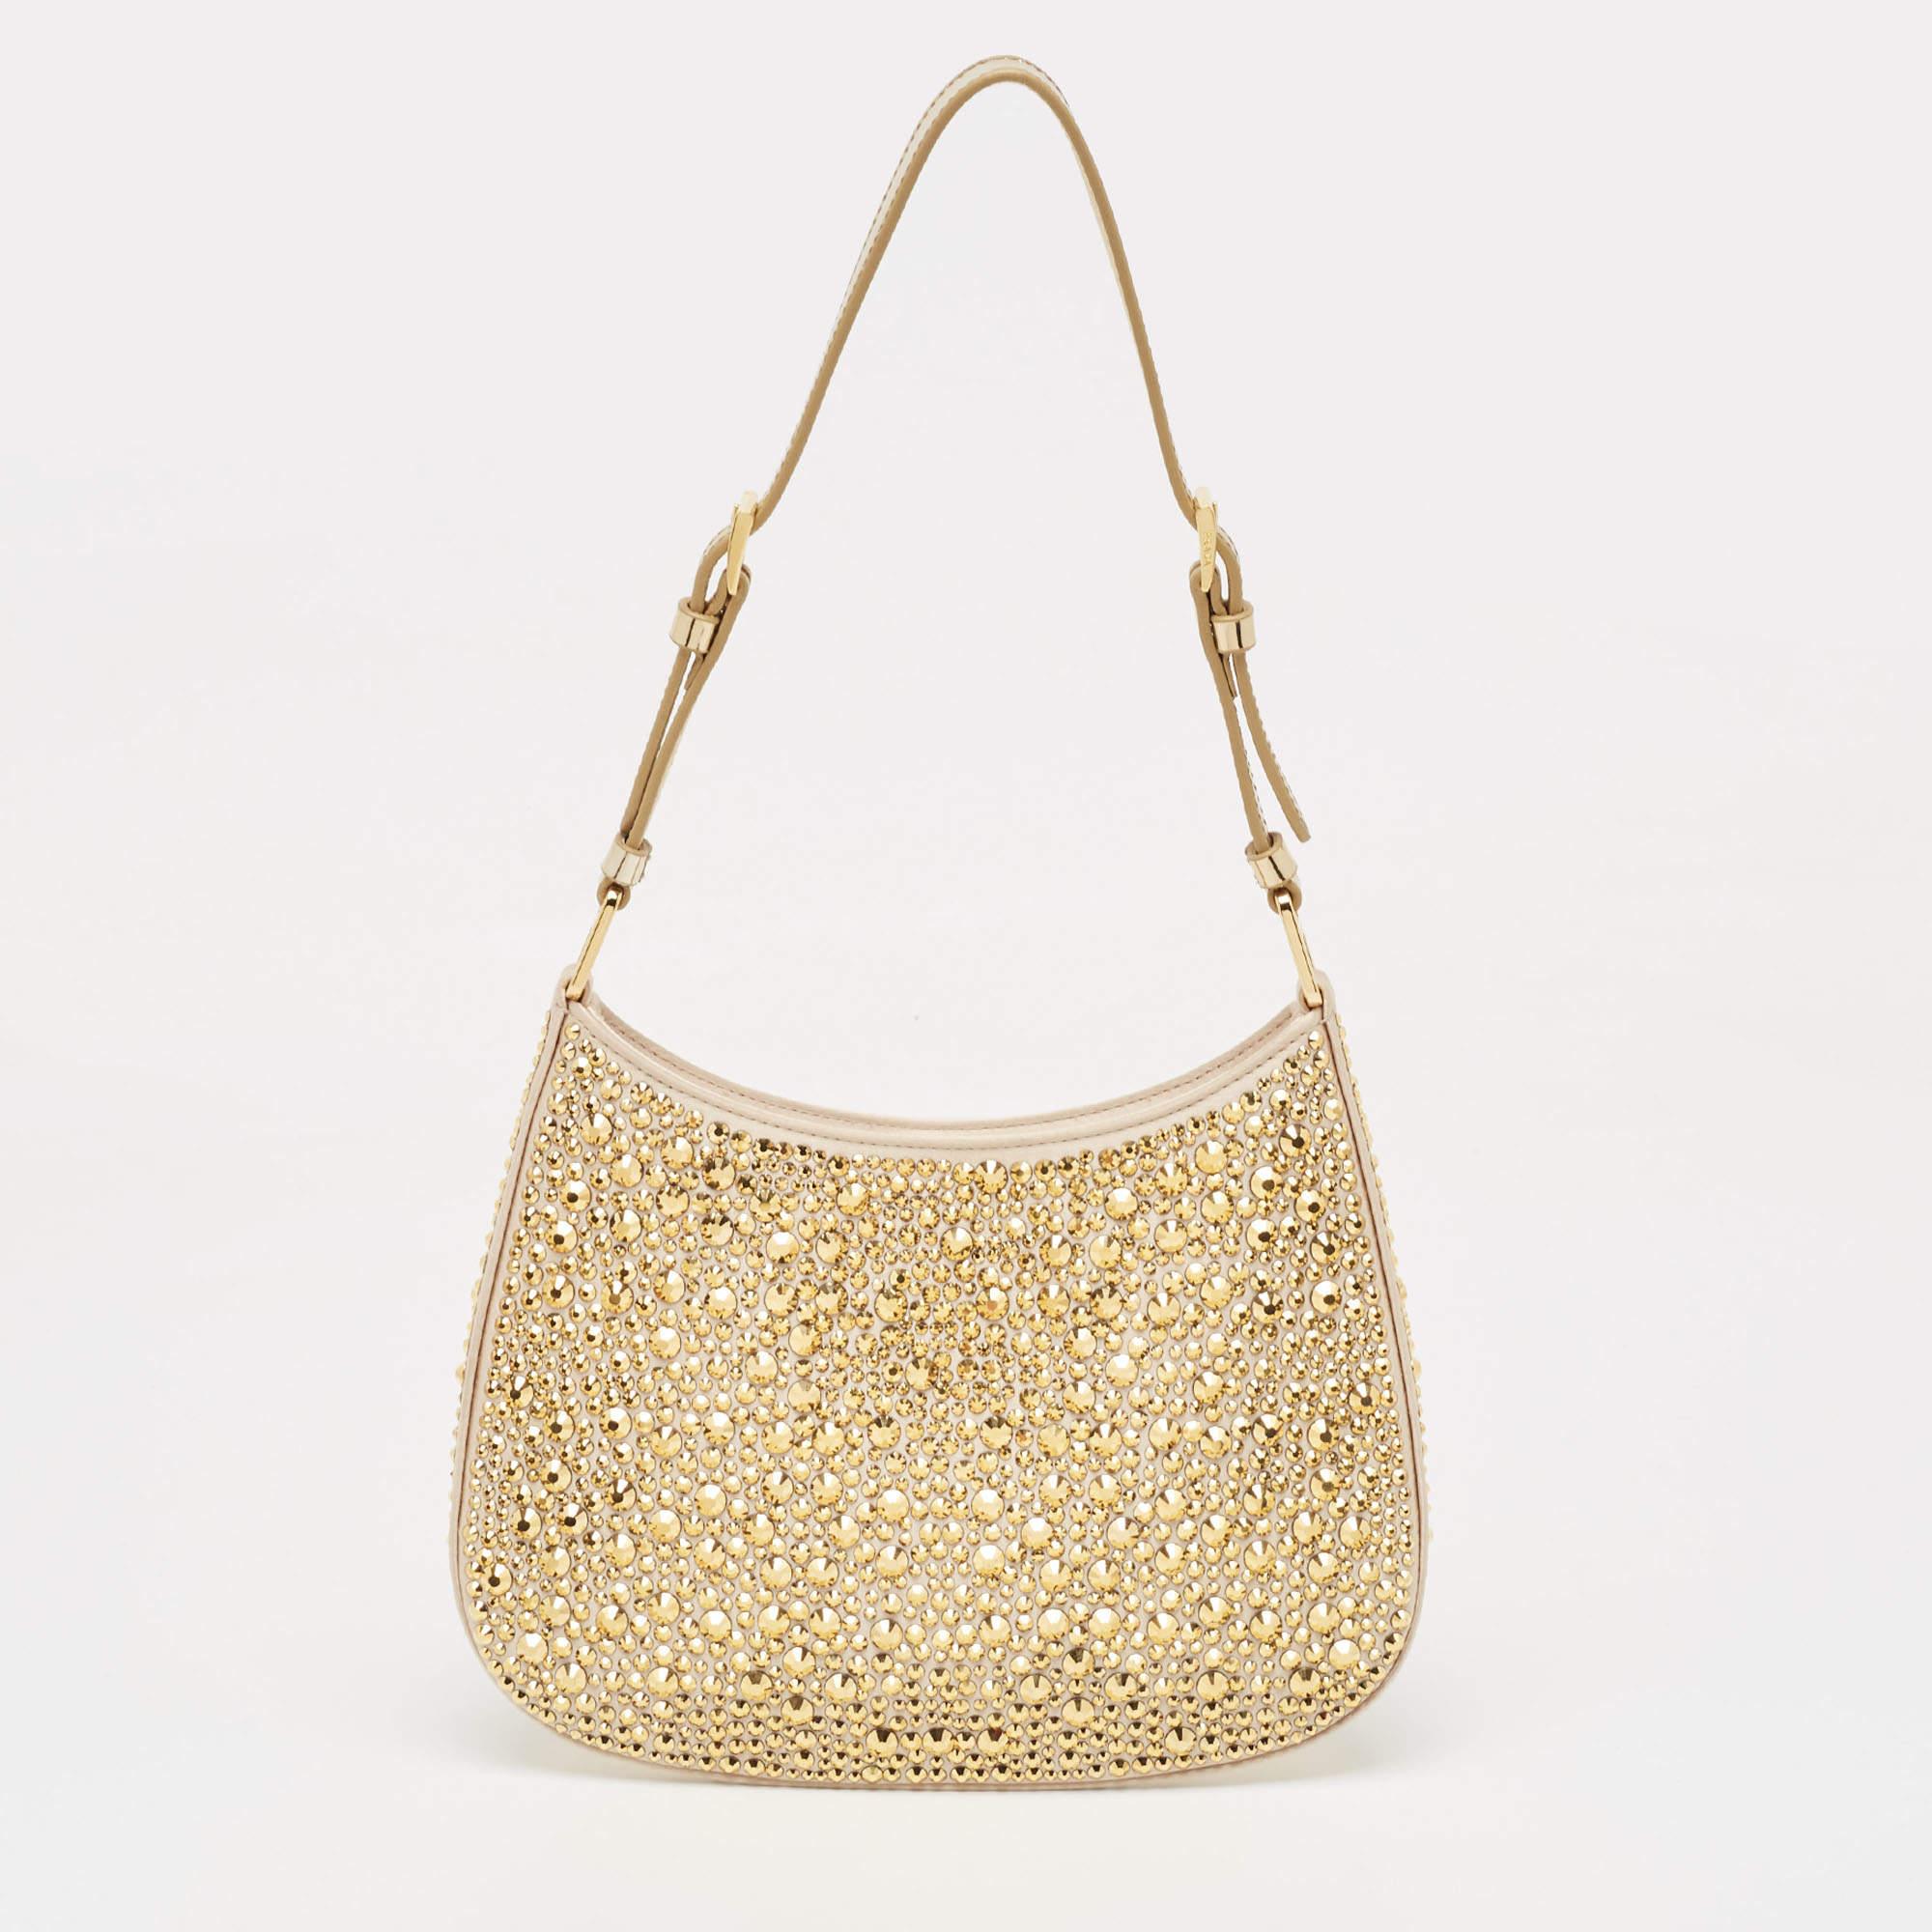 The Prada Cleo Shoulder Bag exudes elegance with its lustrous gold satin exterior adorned with dazzling crystal embellishments. Its sleek silhouette and compact size make it perfect for evening affairs, while the chain strap adds a touch of